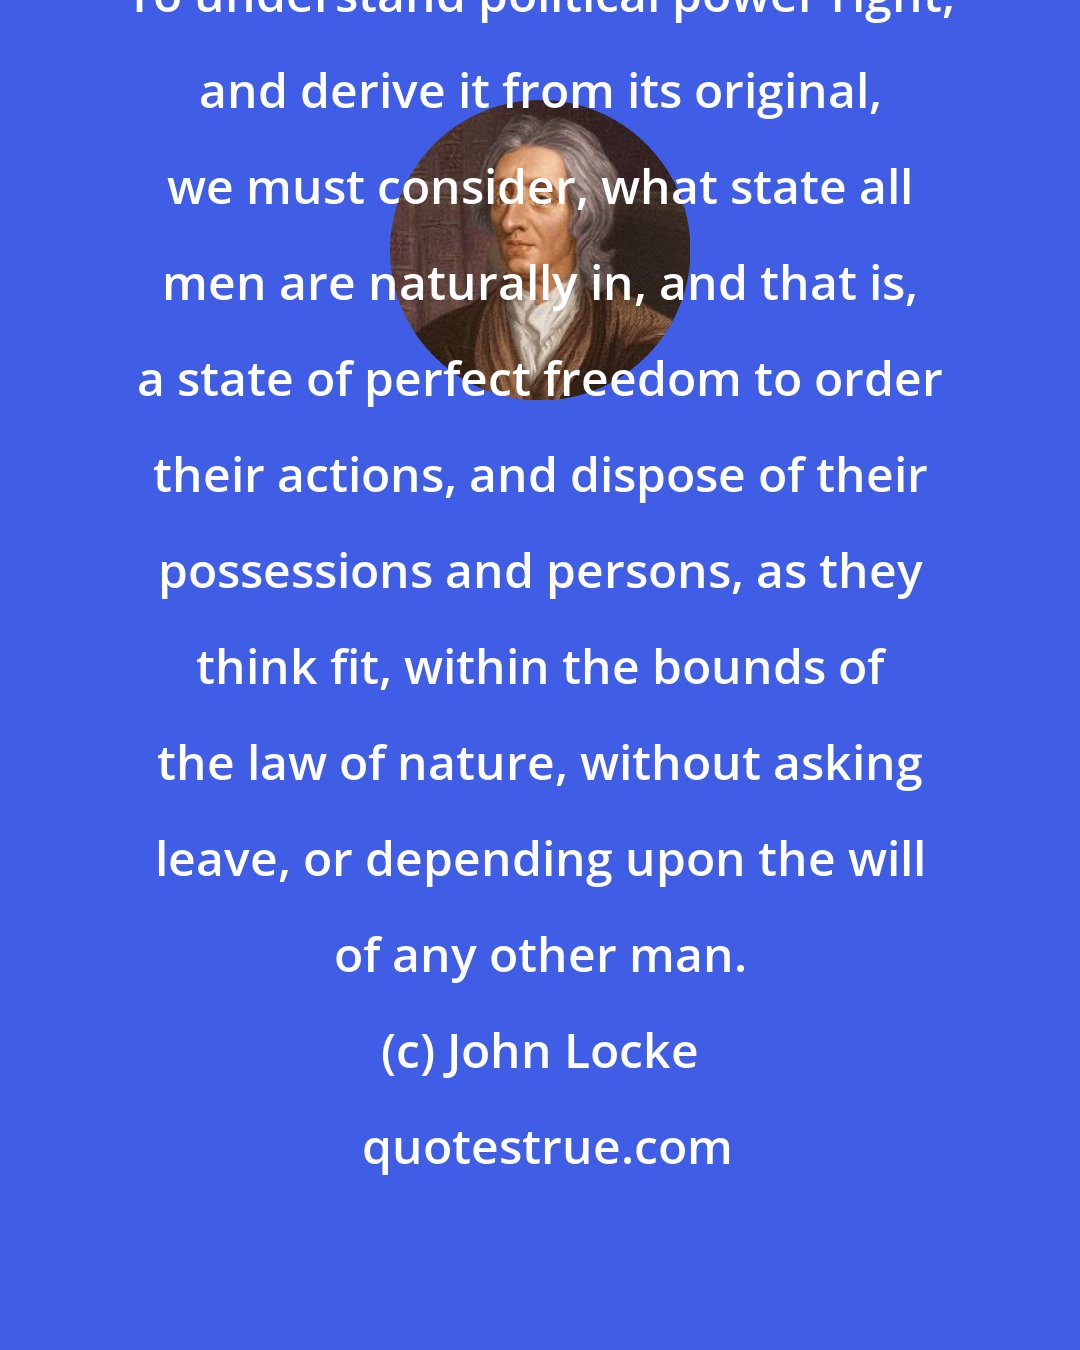 John Locke: To understand political power right, and derive it from its original, we must consider, what state all men are naturally in, and that is, a state of perfect freedom to order their actions, and dispose of their possessions and persons, as they think fit, within the bounds of the law of nature, without asking leave, or depending upon the will of any other man.